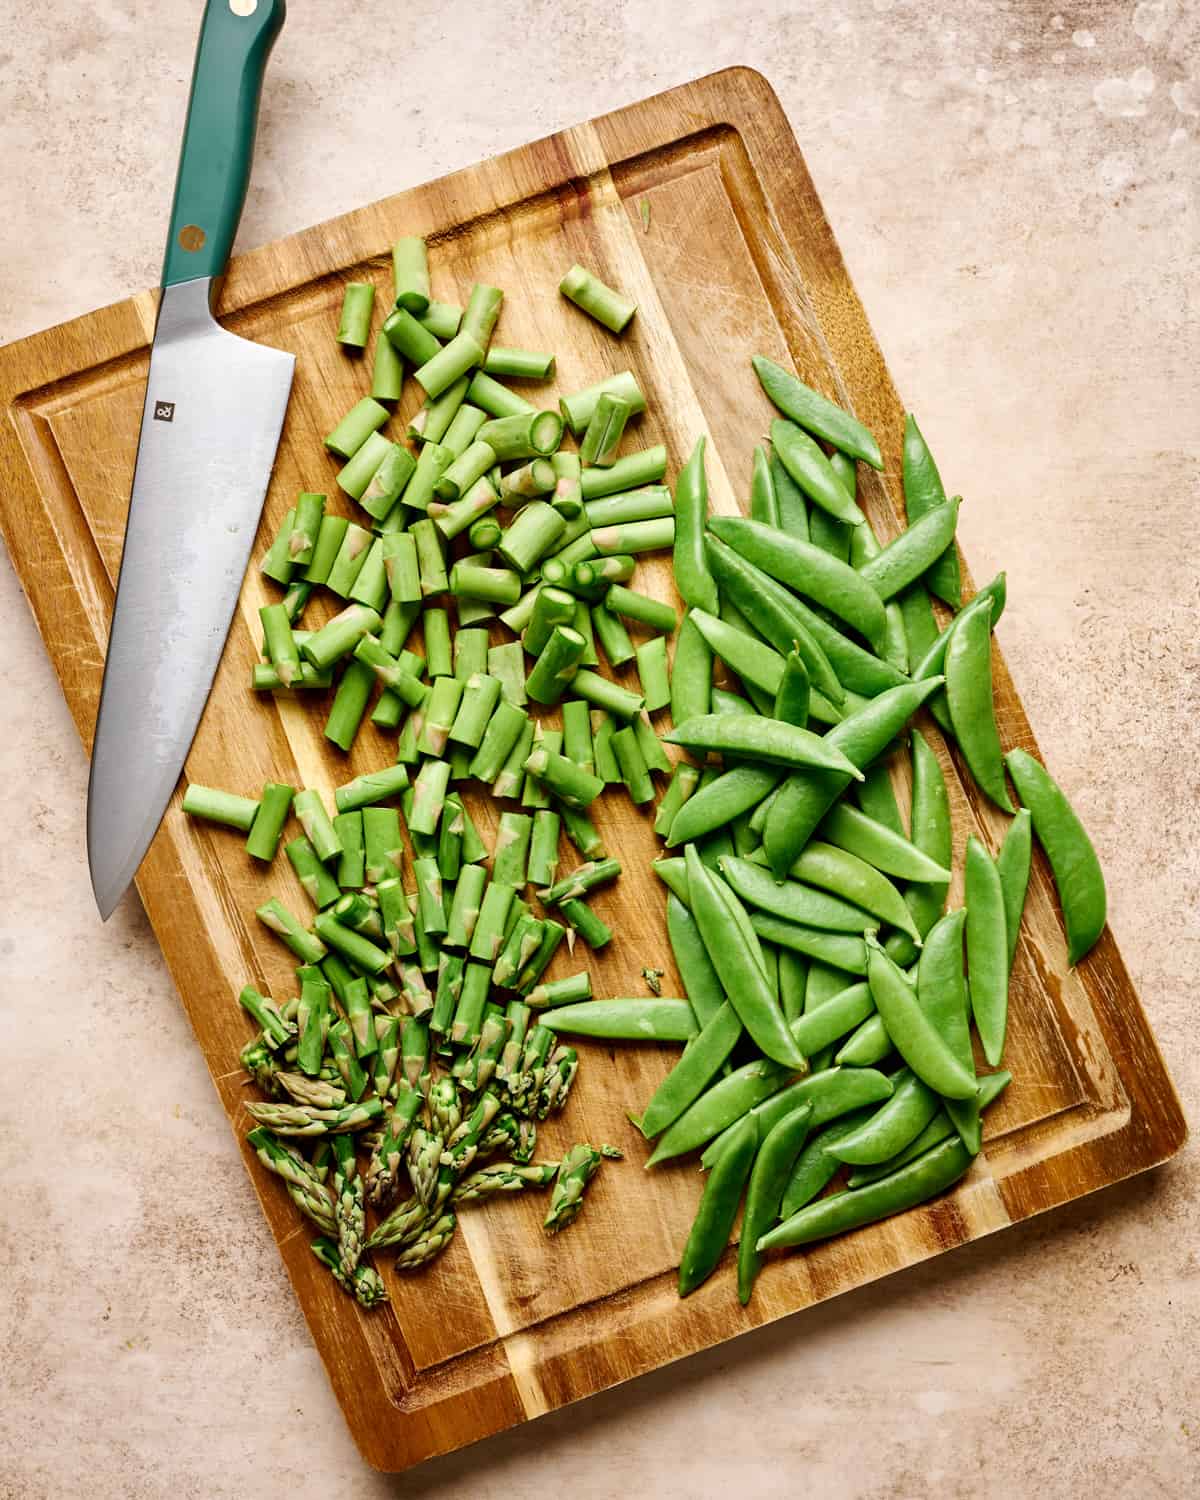 A knife, chopped asparagus and snap peas on a wooden cutting board.